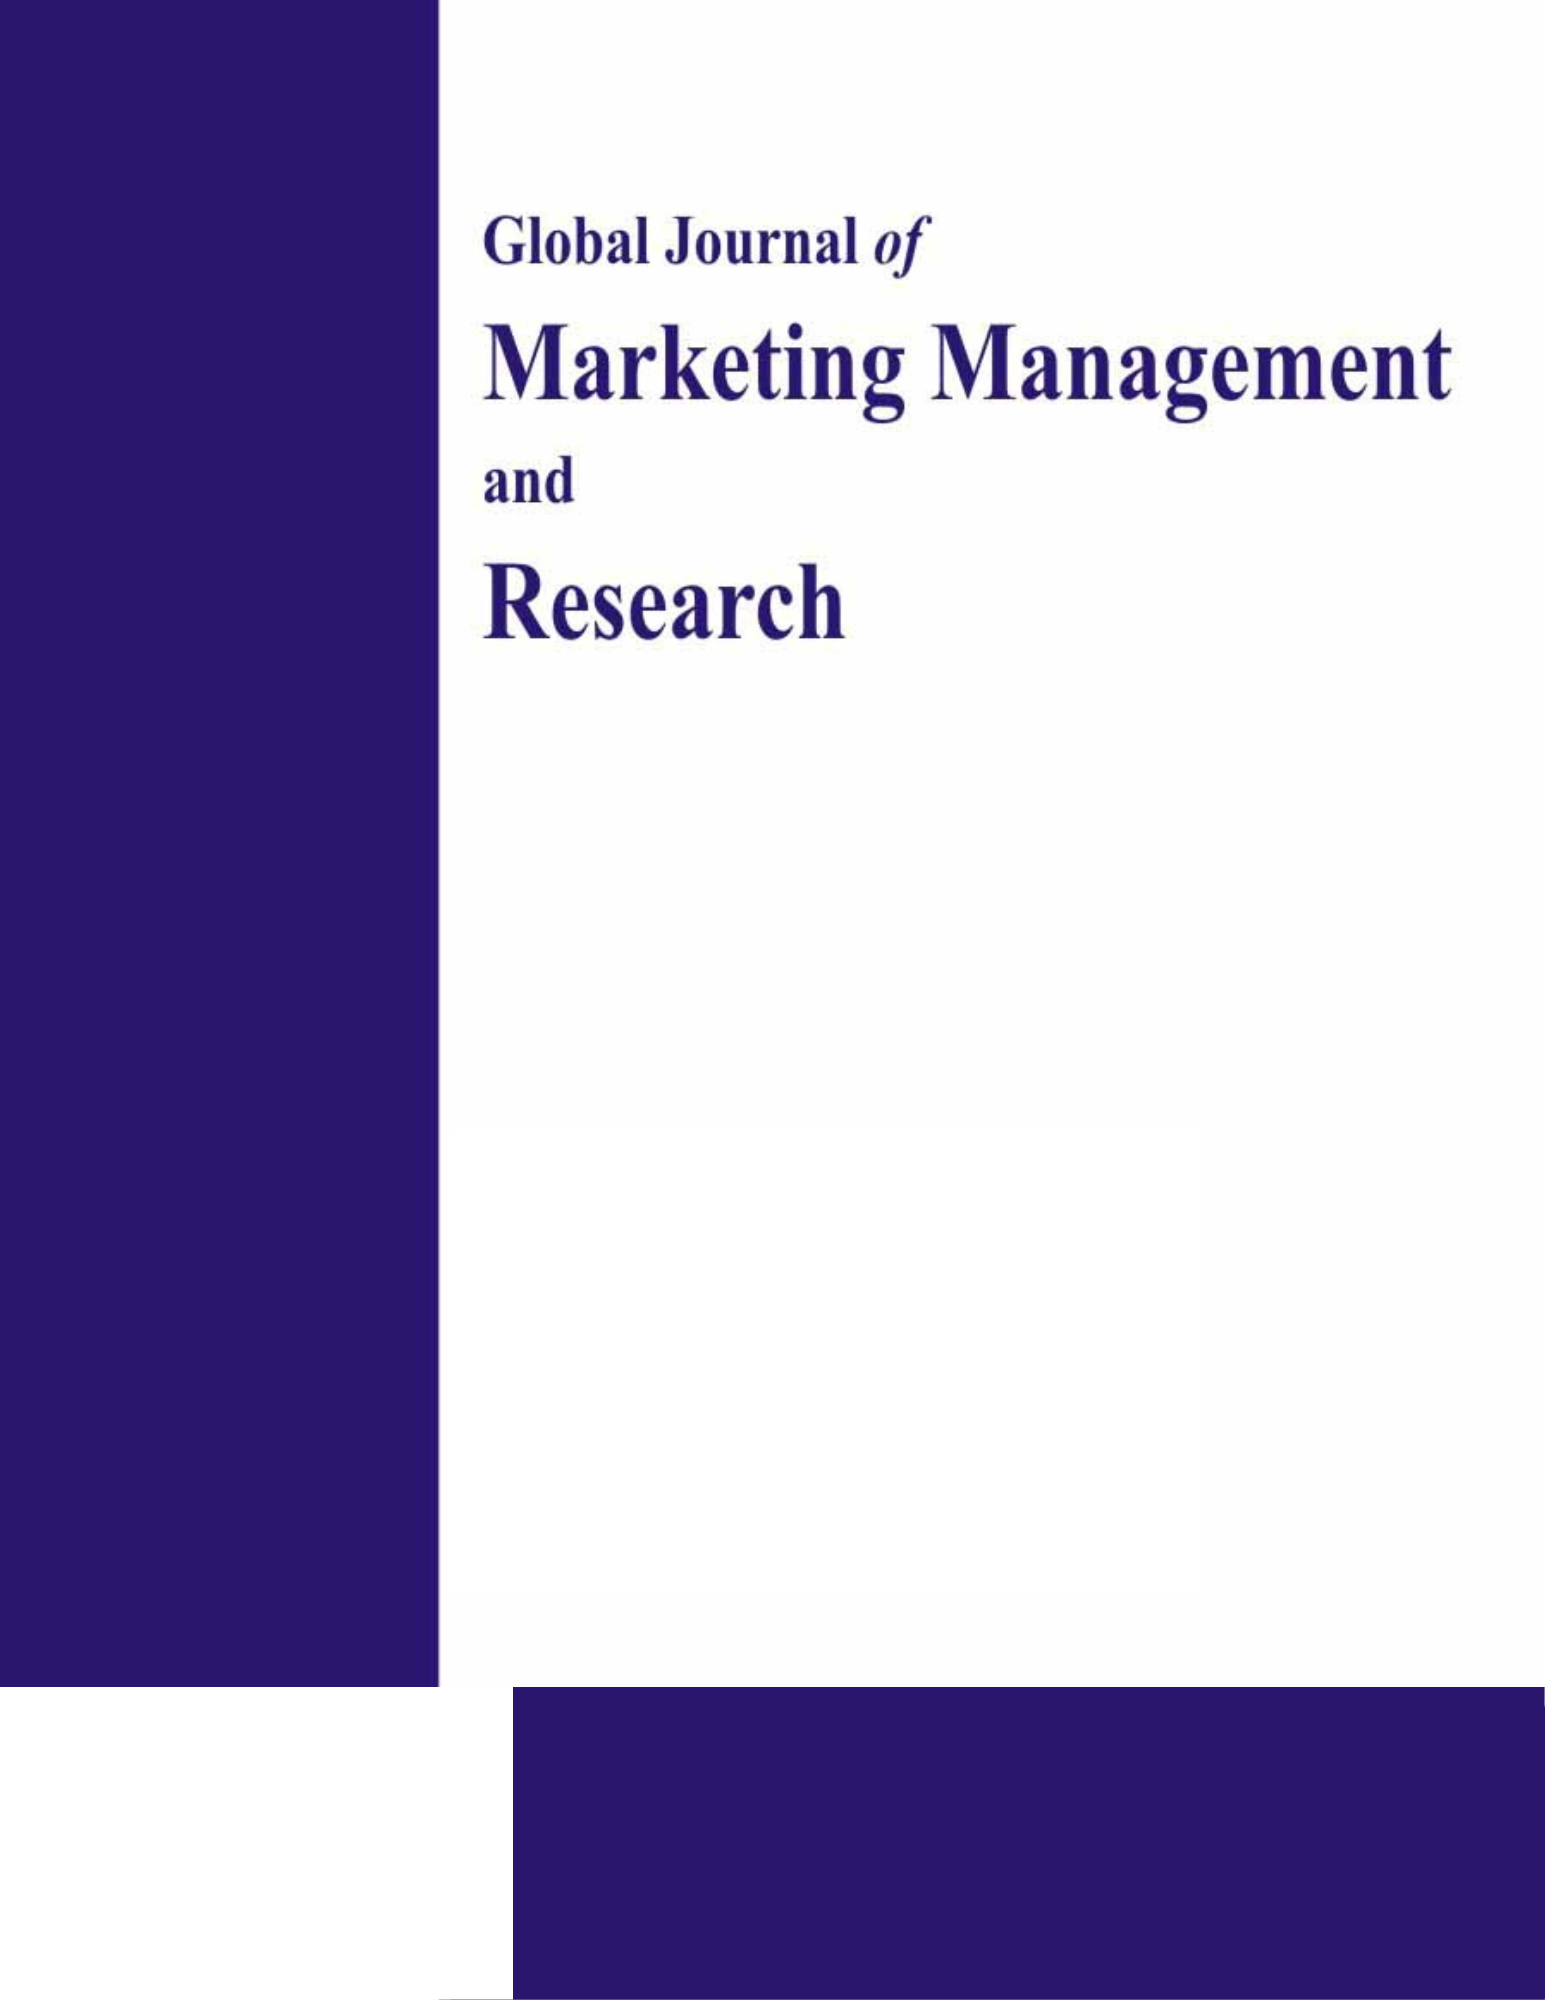 Global Journal of Marketing Management and Research